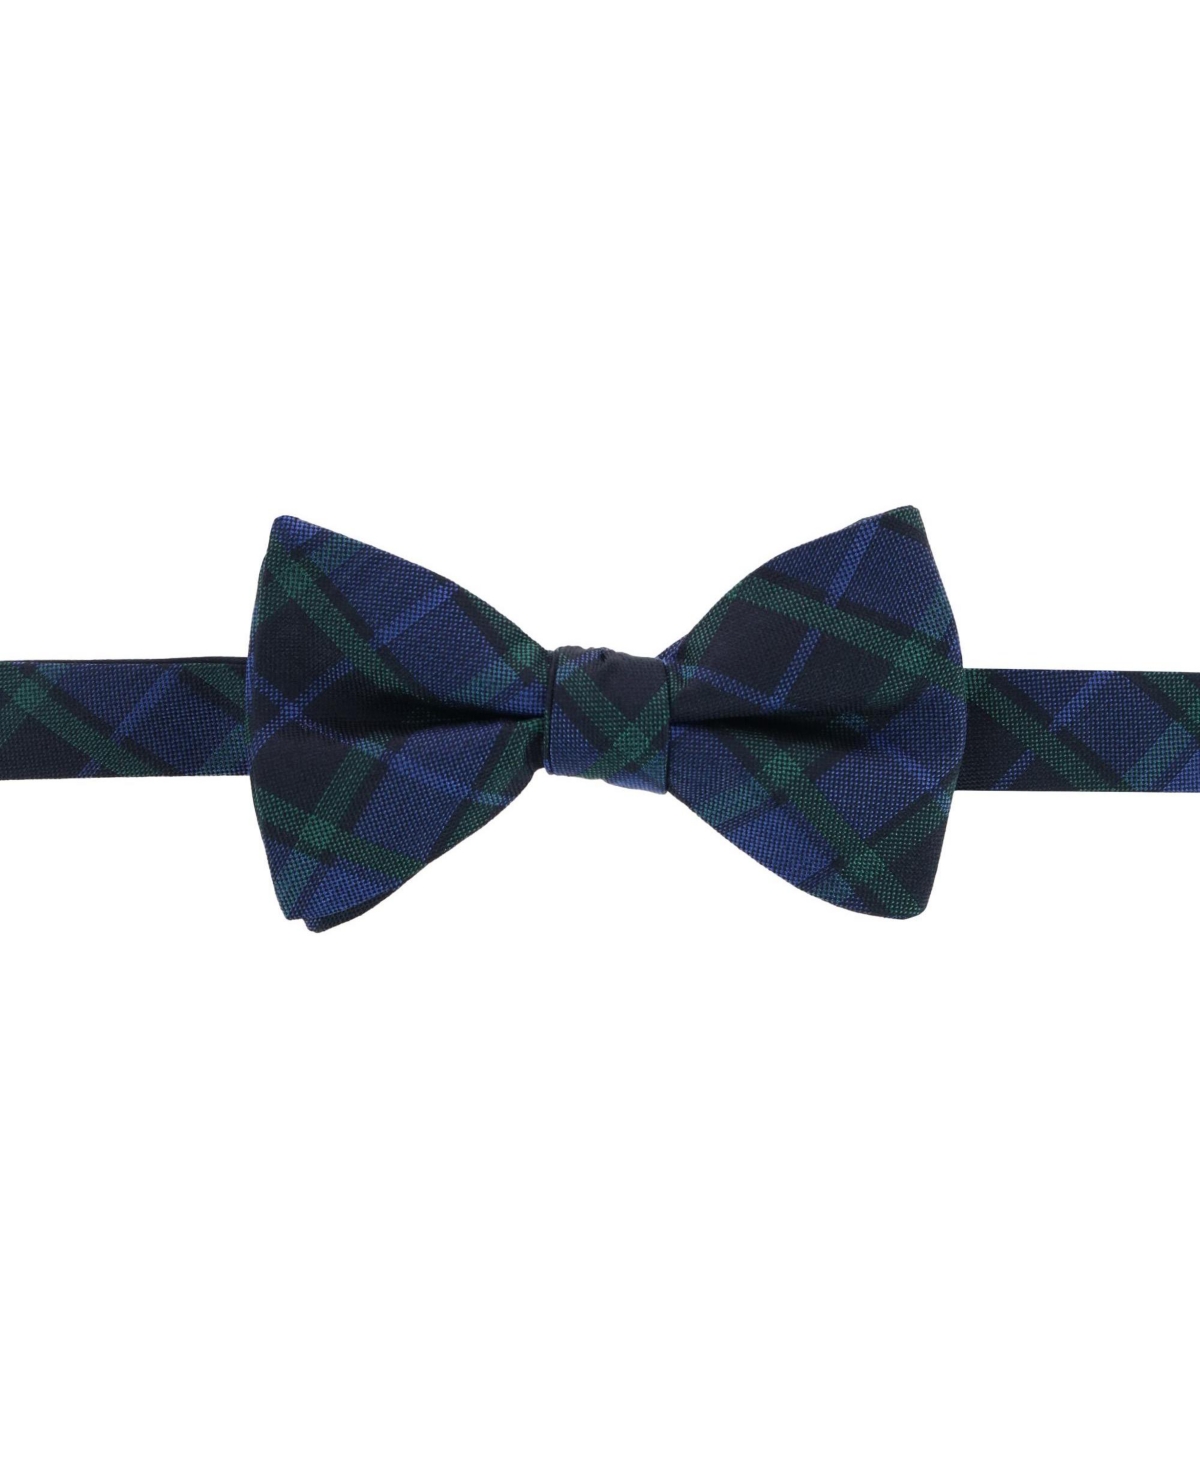 Men's Ives Green and Navy Blackwatch Plaid Silk Bow Tie - Green